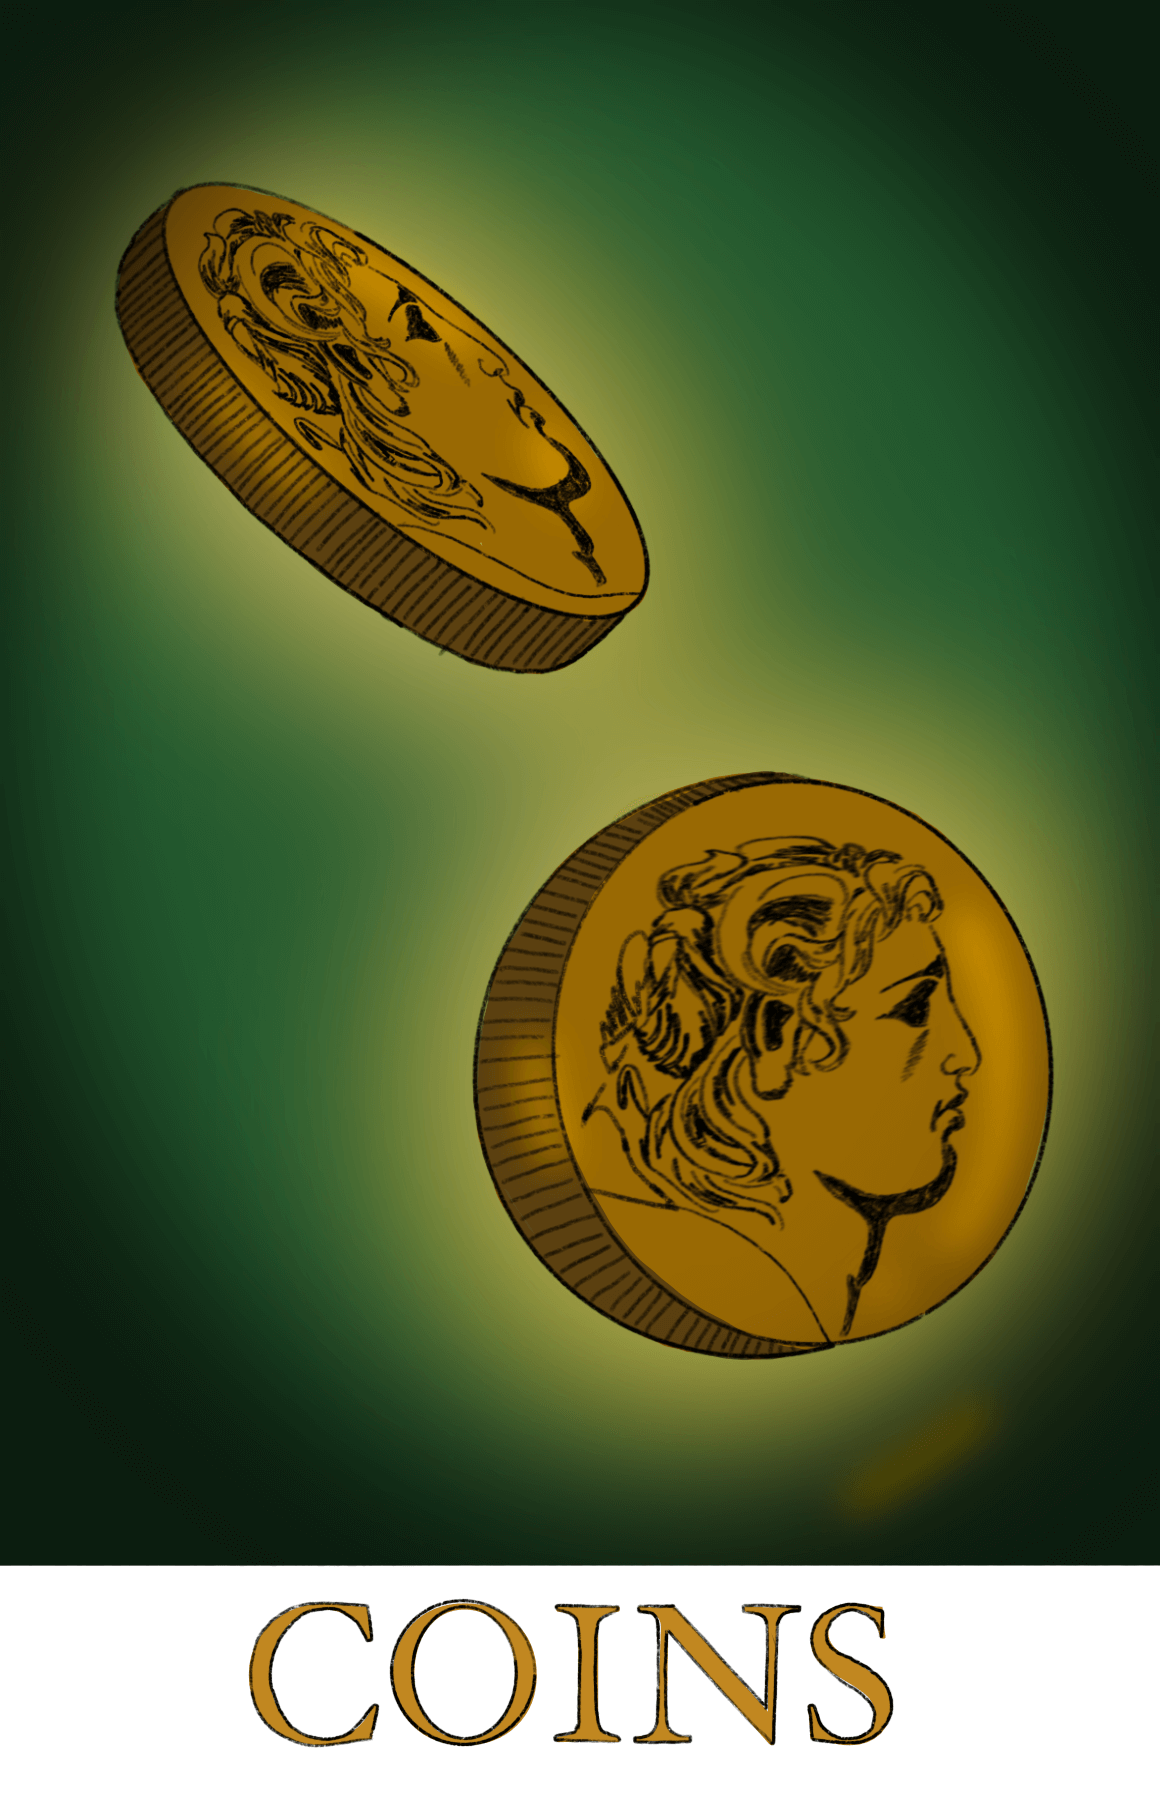 Illustration of Coins